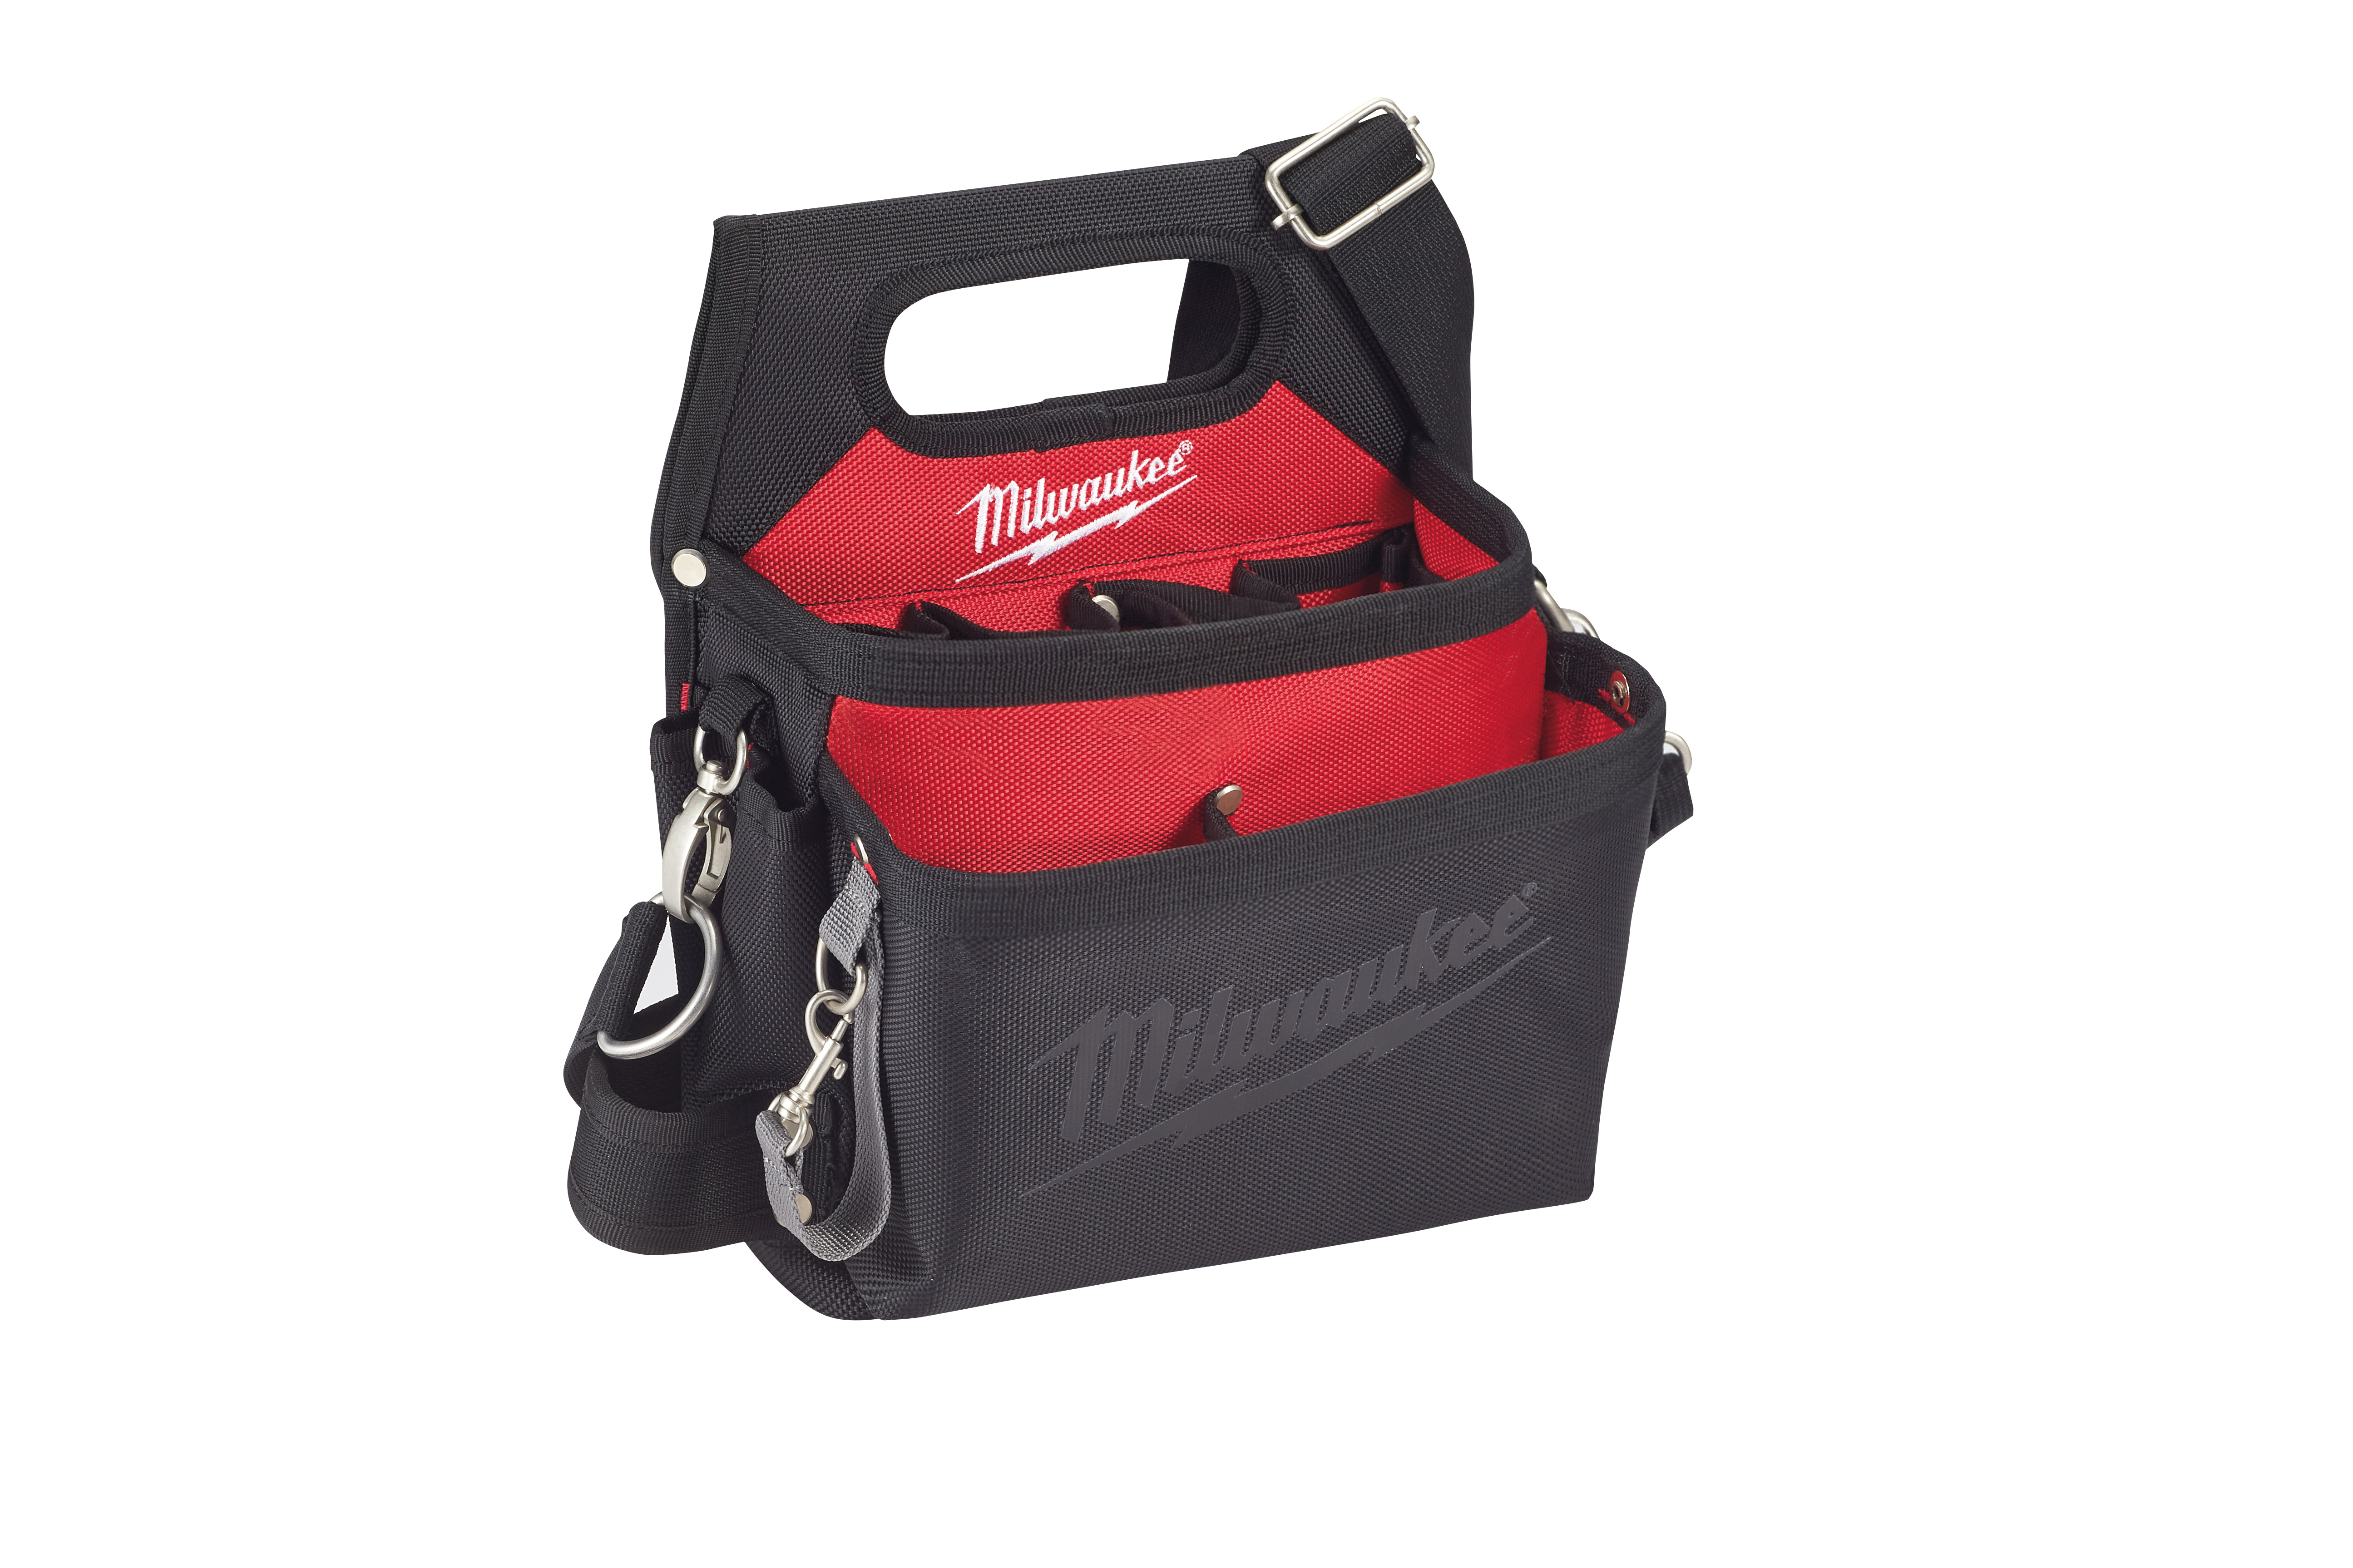 48-22-8112 045242509157 Milwaukee work gear is nothing but heavy duty. Designed with professional tradesmen in mind and built with 1680 denier nylon, riveted seams, and all metal hardware, Milwaukee work gear is up to 5X more durable than competitive products and provides users with unmatched durability, comfort and organization. The electricians work pouch w/ quick adjust belt provides users with 15 pockets to organize their tools and incorporates a solid base that allows the bag to remain upright when set on a flat surface. The integrated handle allows the bag to be easily transported from and task to task and the metal tape measure clip securely stores a tape measure for easy access. A plastic lined puncture-resistant pocket allows users to store sharp objects, such as jab saws, without worry of damaging their bags.